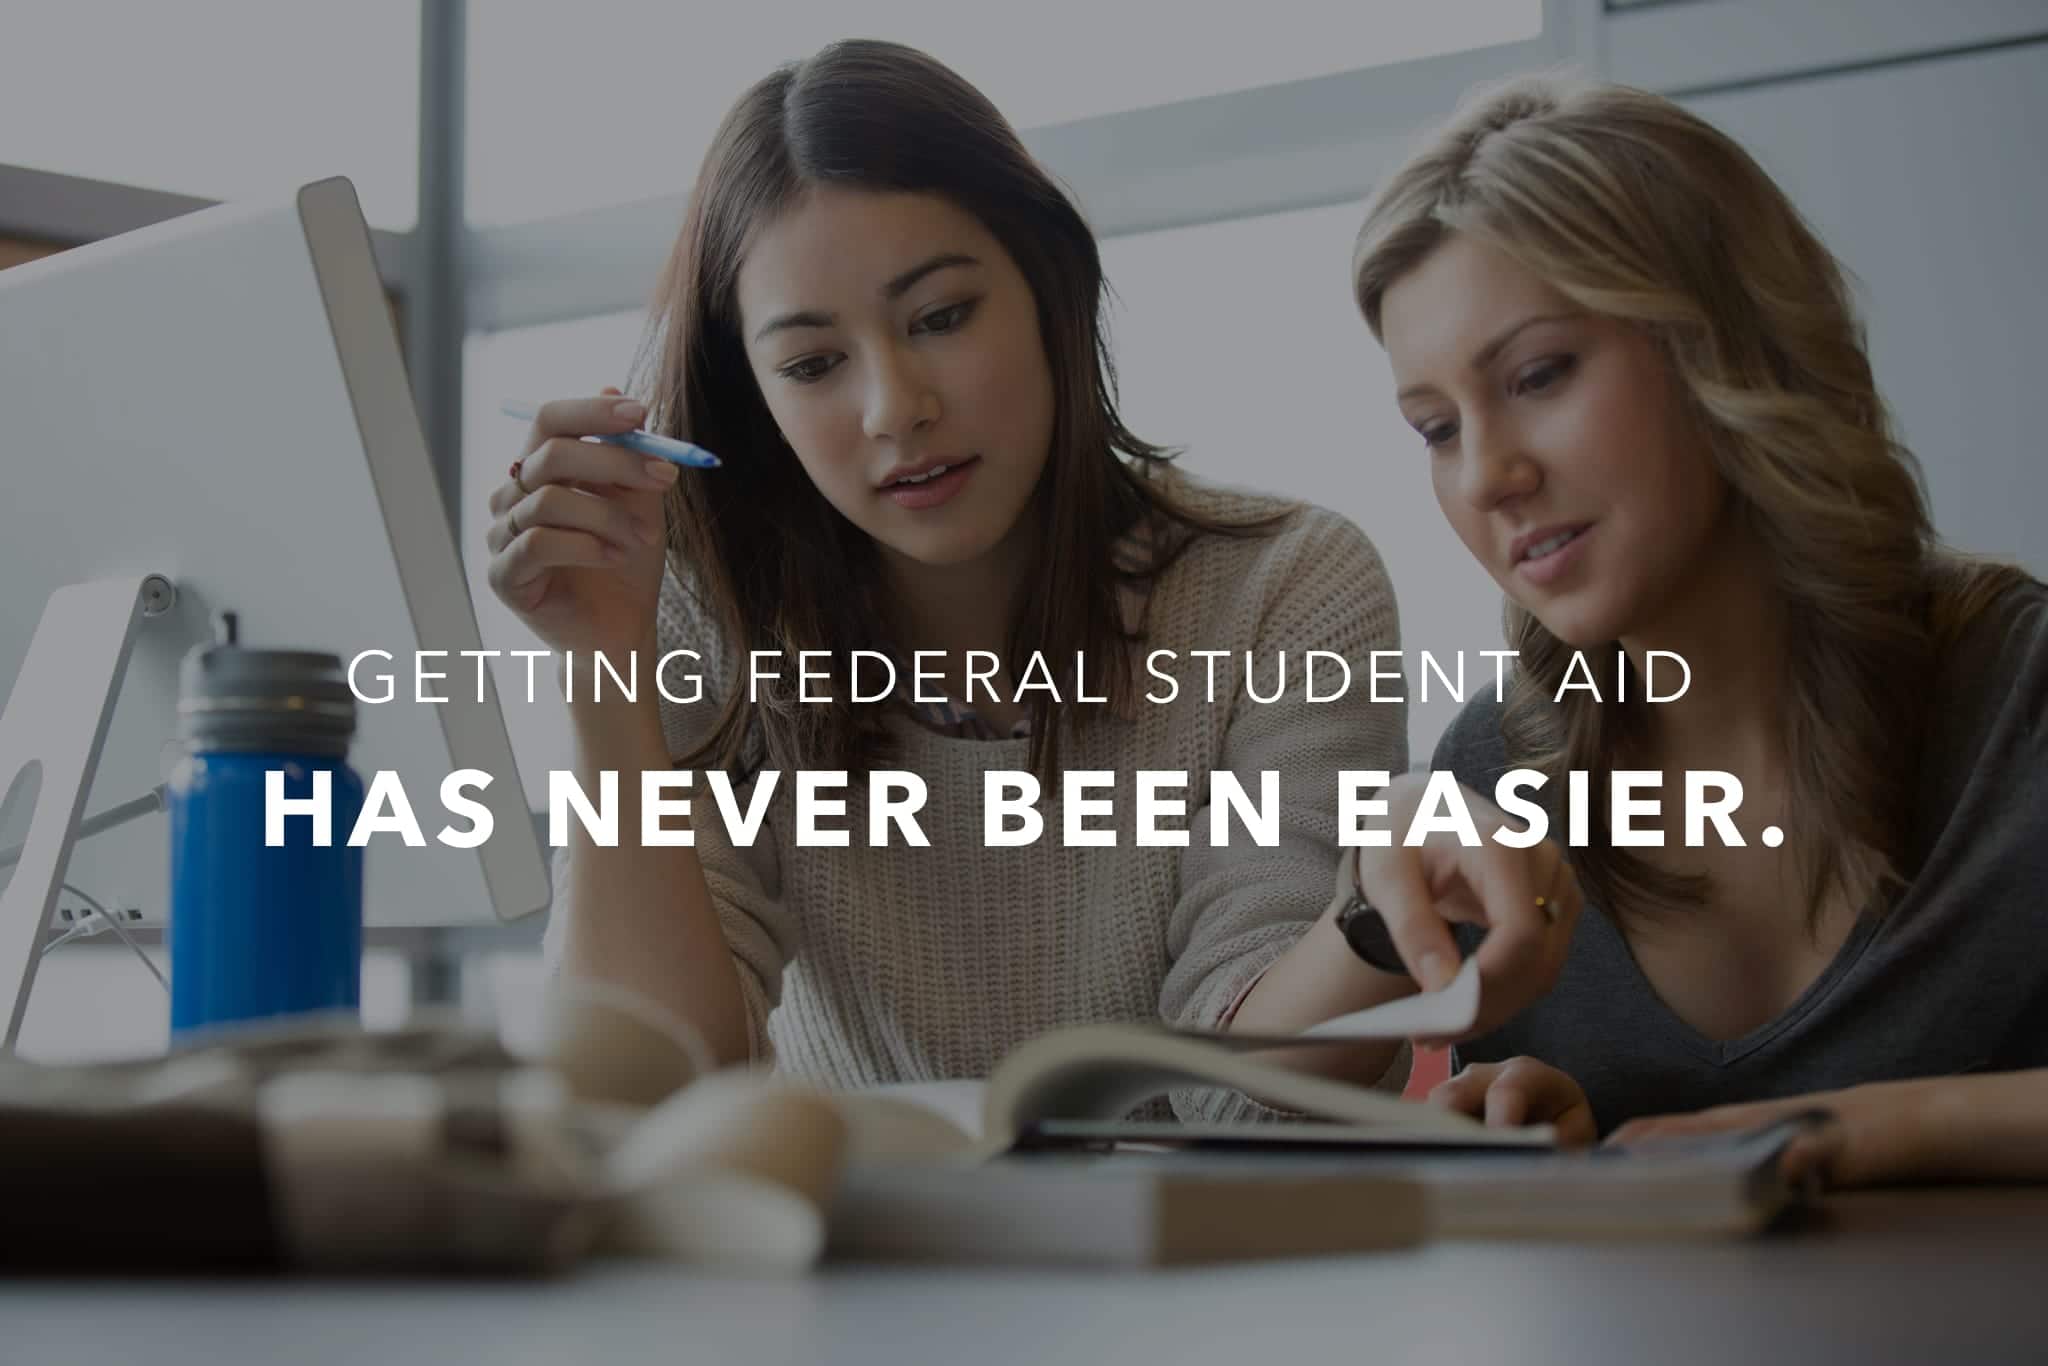 U.S. DEPARTMENT OF EDUCATION CAMPAIGN